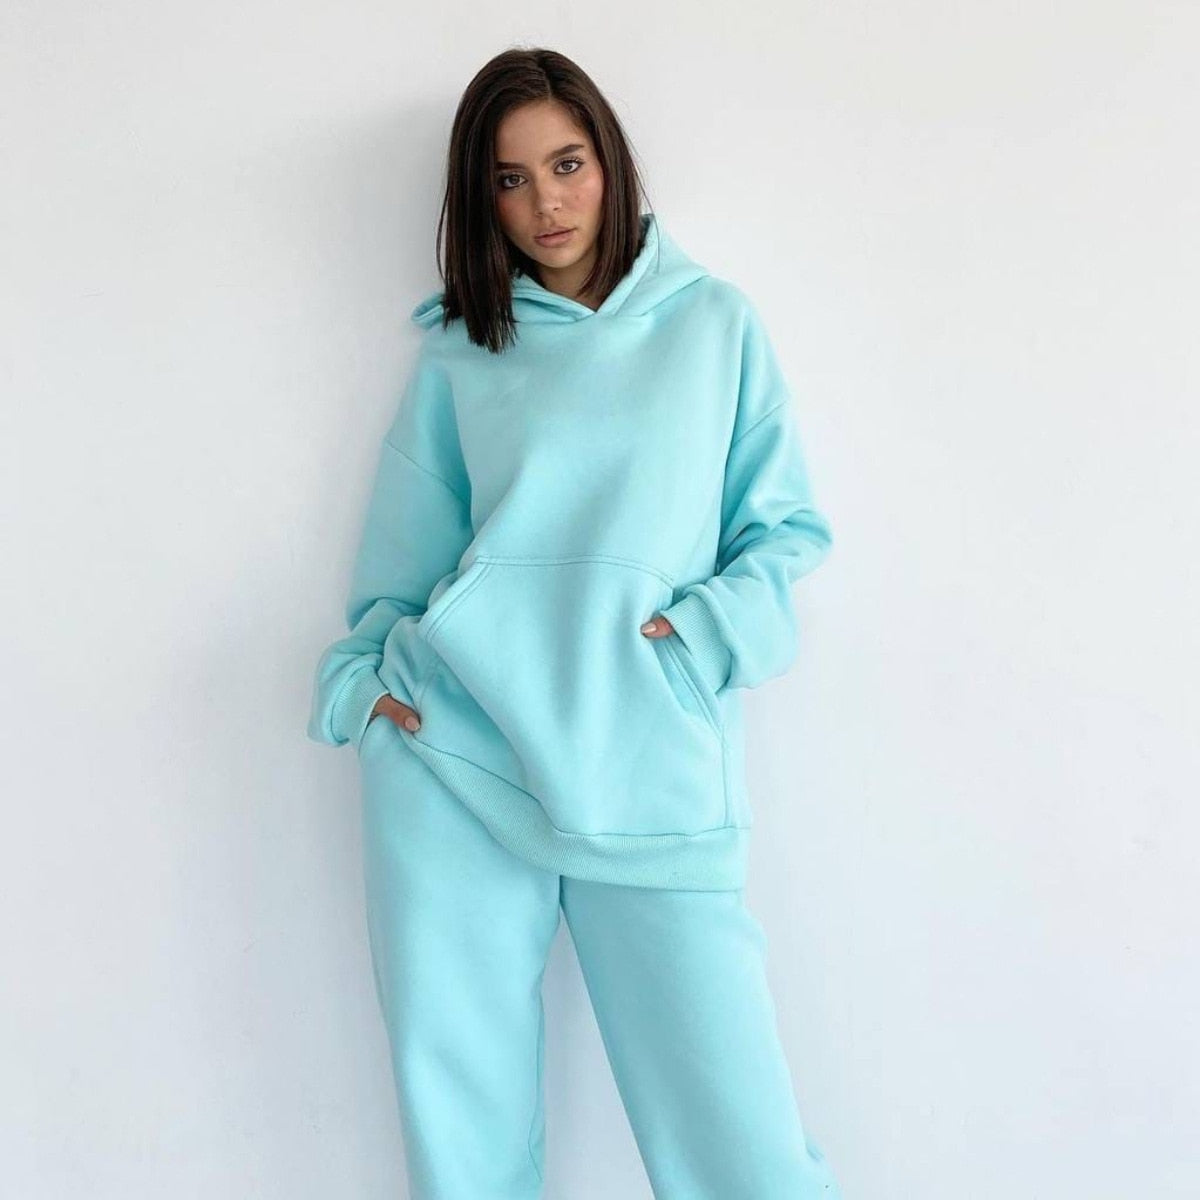 Two Piece Set Women Long Sleeve Oversized Hooded +Sport Pants Autumn Solid Tracksuit Casual Sportswear Suit Match